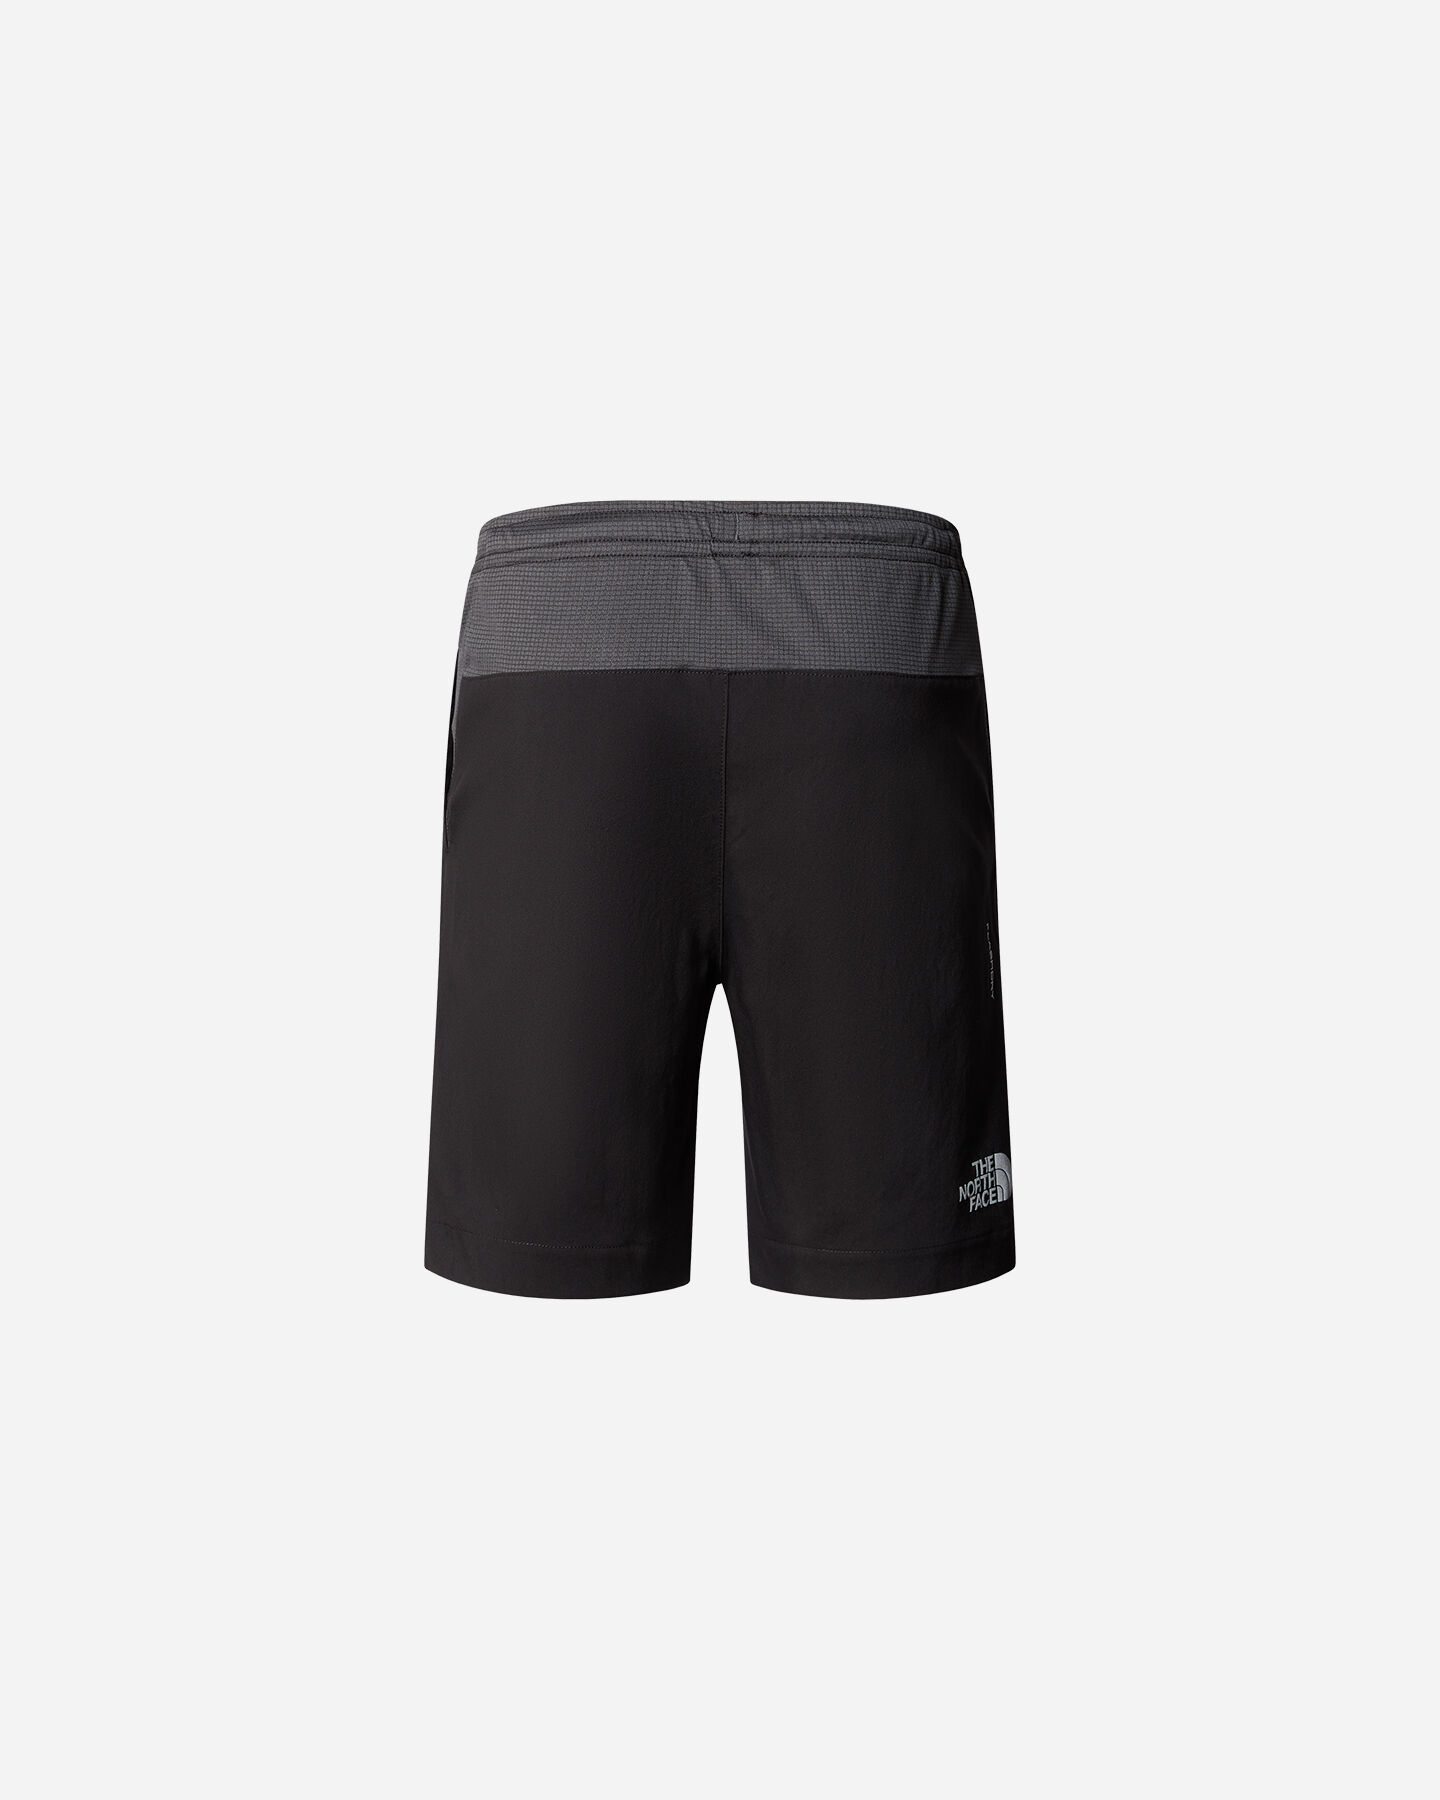  Pantaloncini THE NORTH FACE REACTOR JR S5651394|KT0|S scatto 1